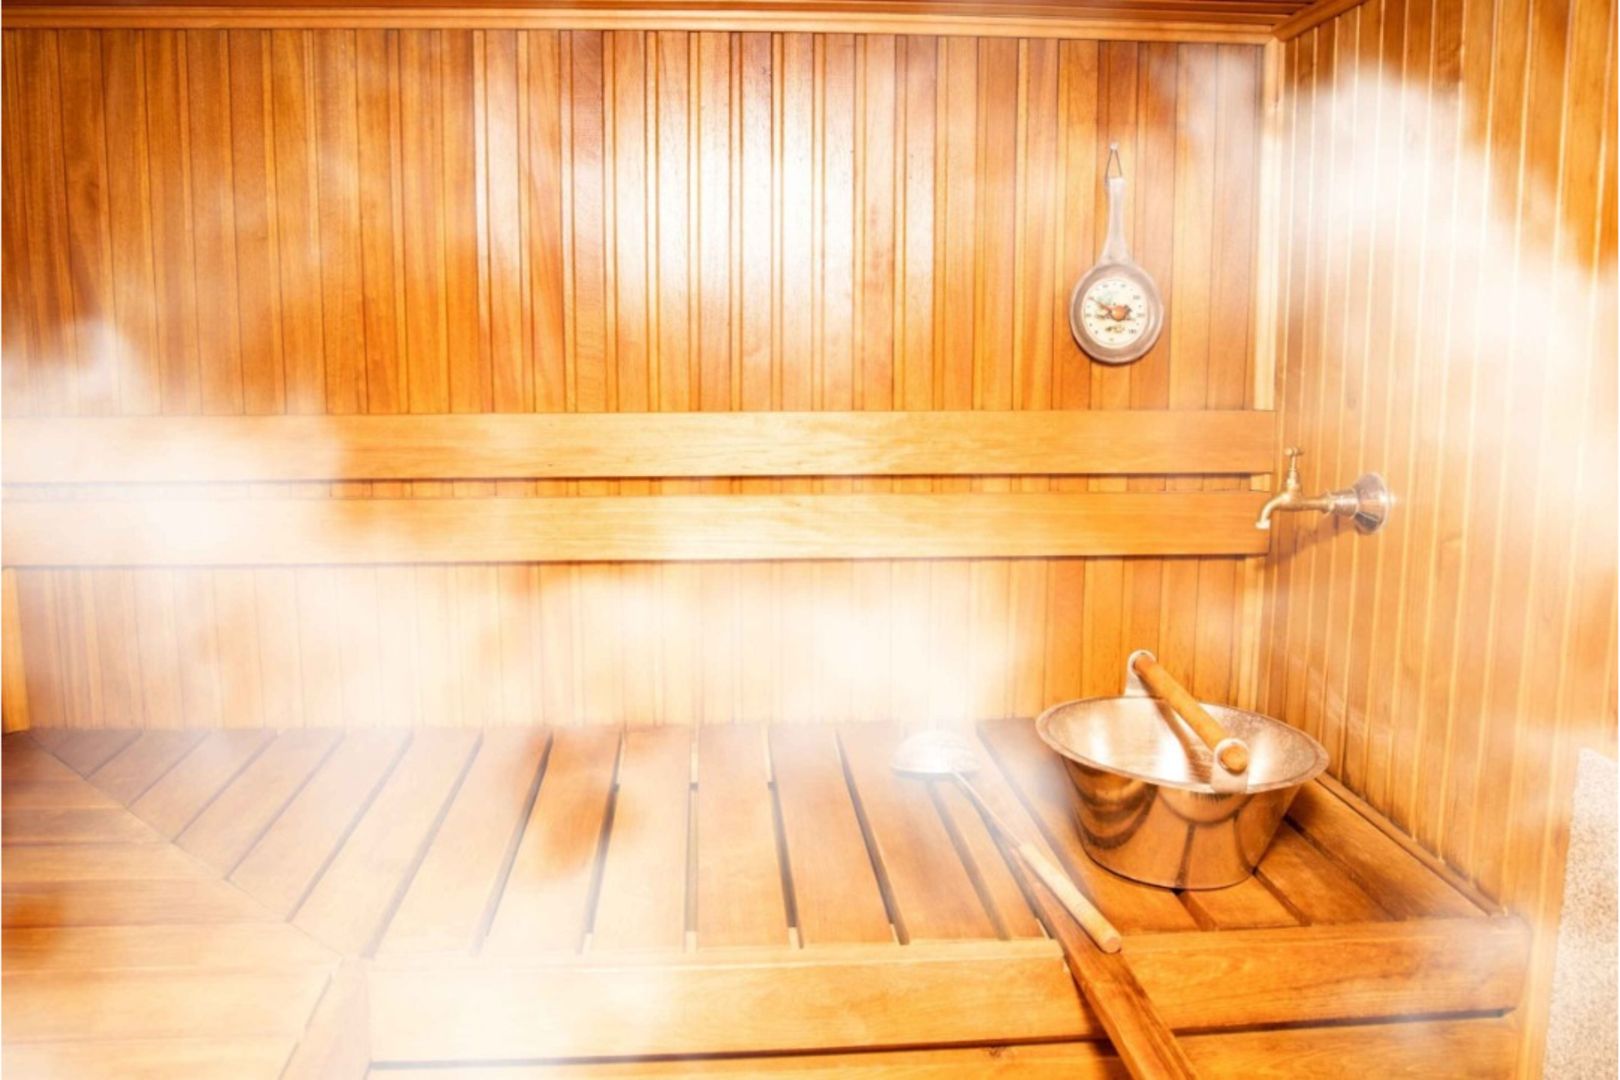 A lively sauna chat about losing our animalistic side | The Citizen